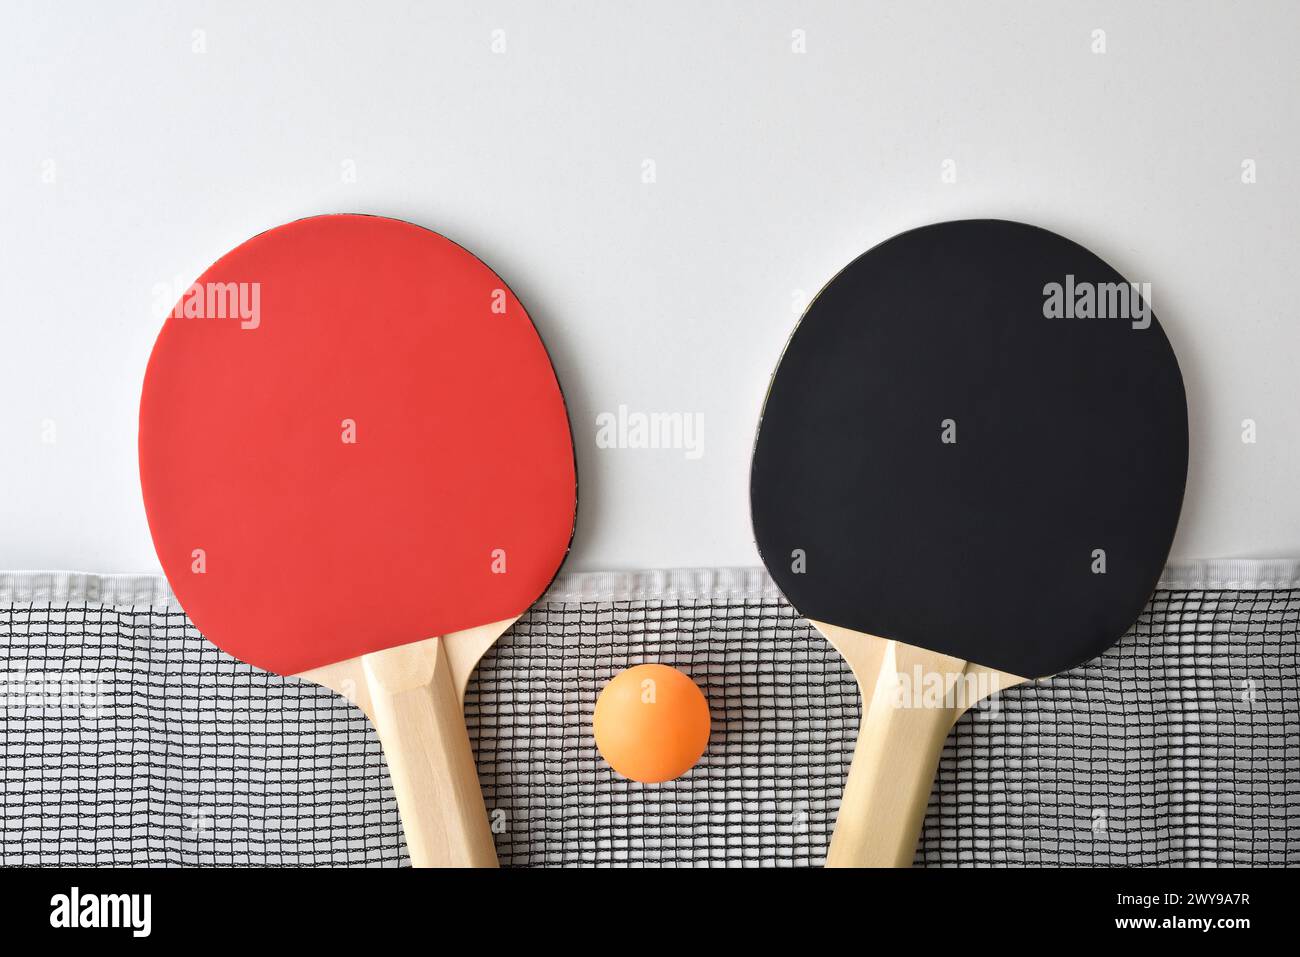 Background with set of table tennis paddles; net and orange ball isolated on white table. Top view. Stock Photo